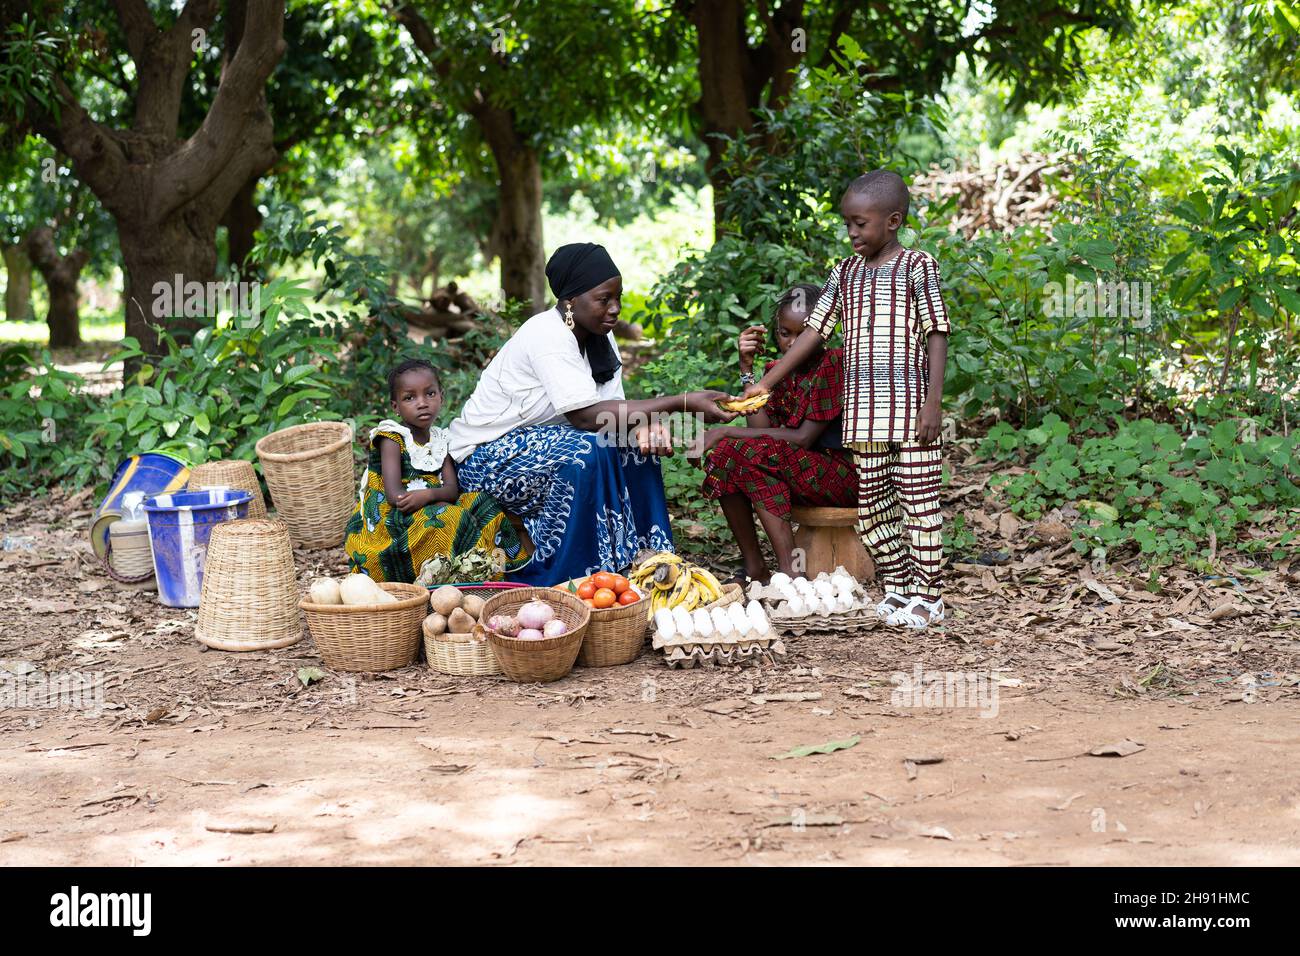 Cute little black boy buying a banana from a group of West African street market vendors sitting under some large mango trees by the roadside Stock Photo